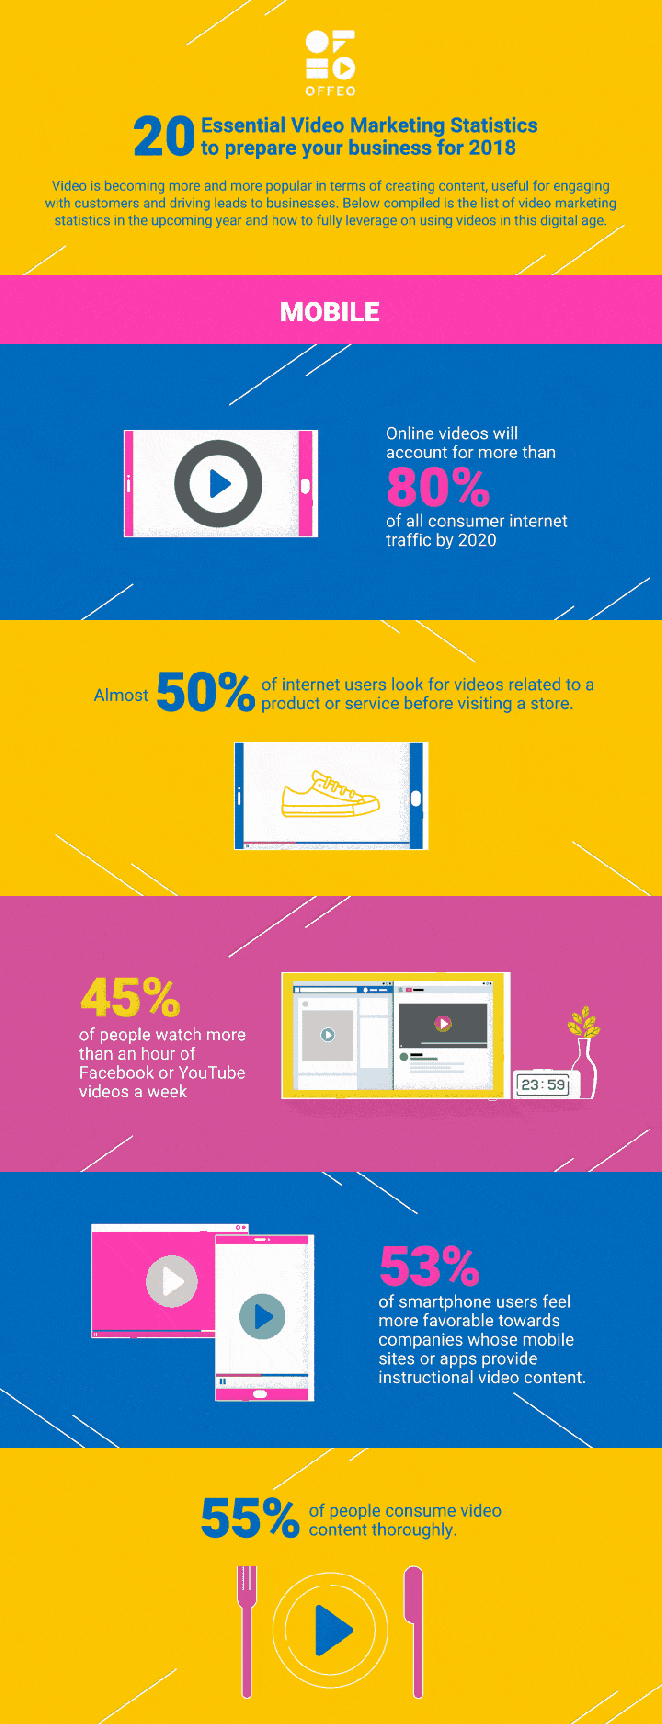 20 Business Video Marketing Statistics for 2018 Infographic - Video Marketing - Digital Marketing - Kate Vega